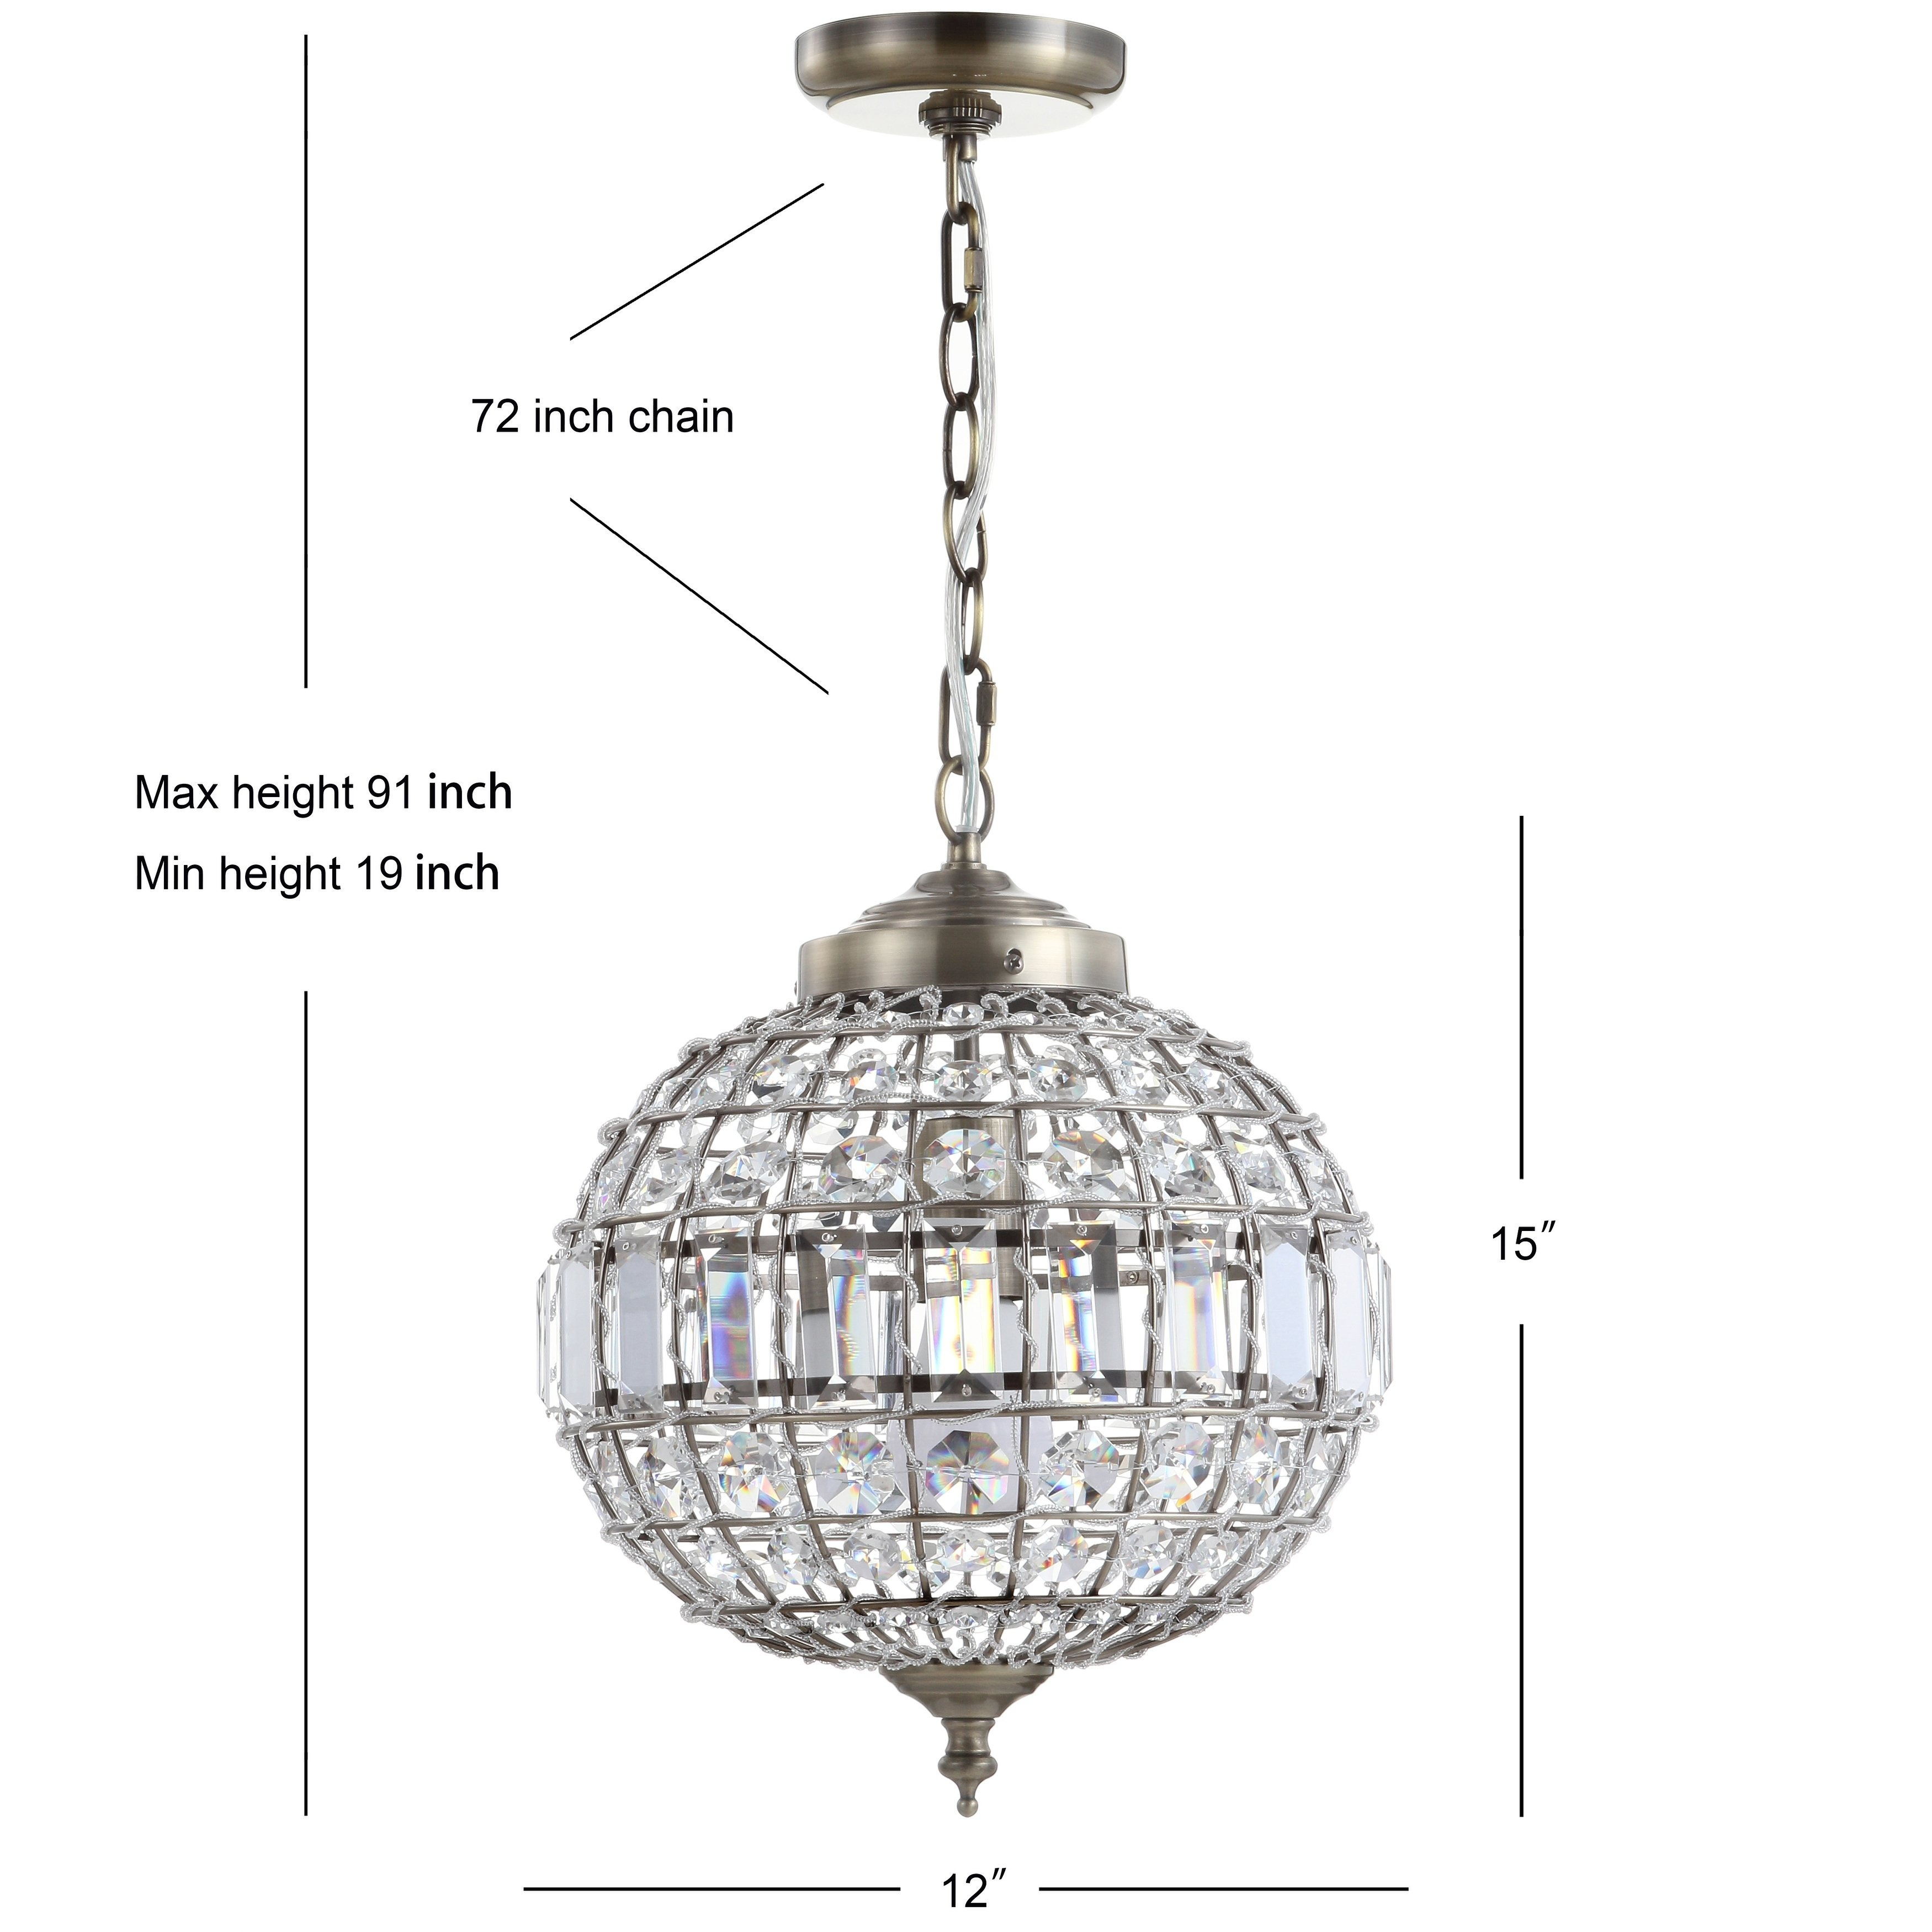 Wiring Diagram For Electric Chandelier - Wiring Diagrams Lose - Chandelier Wiring Diagram